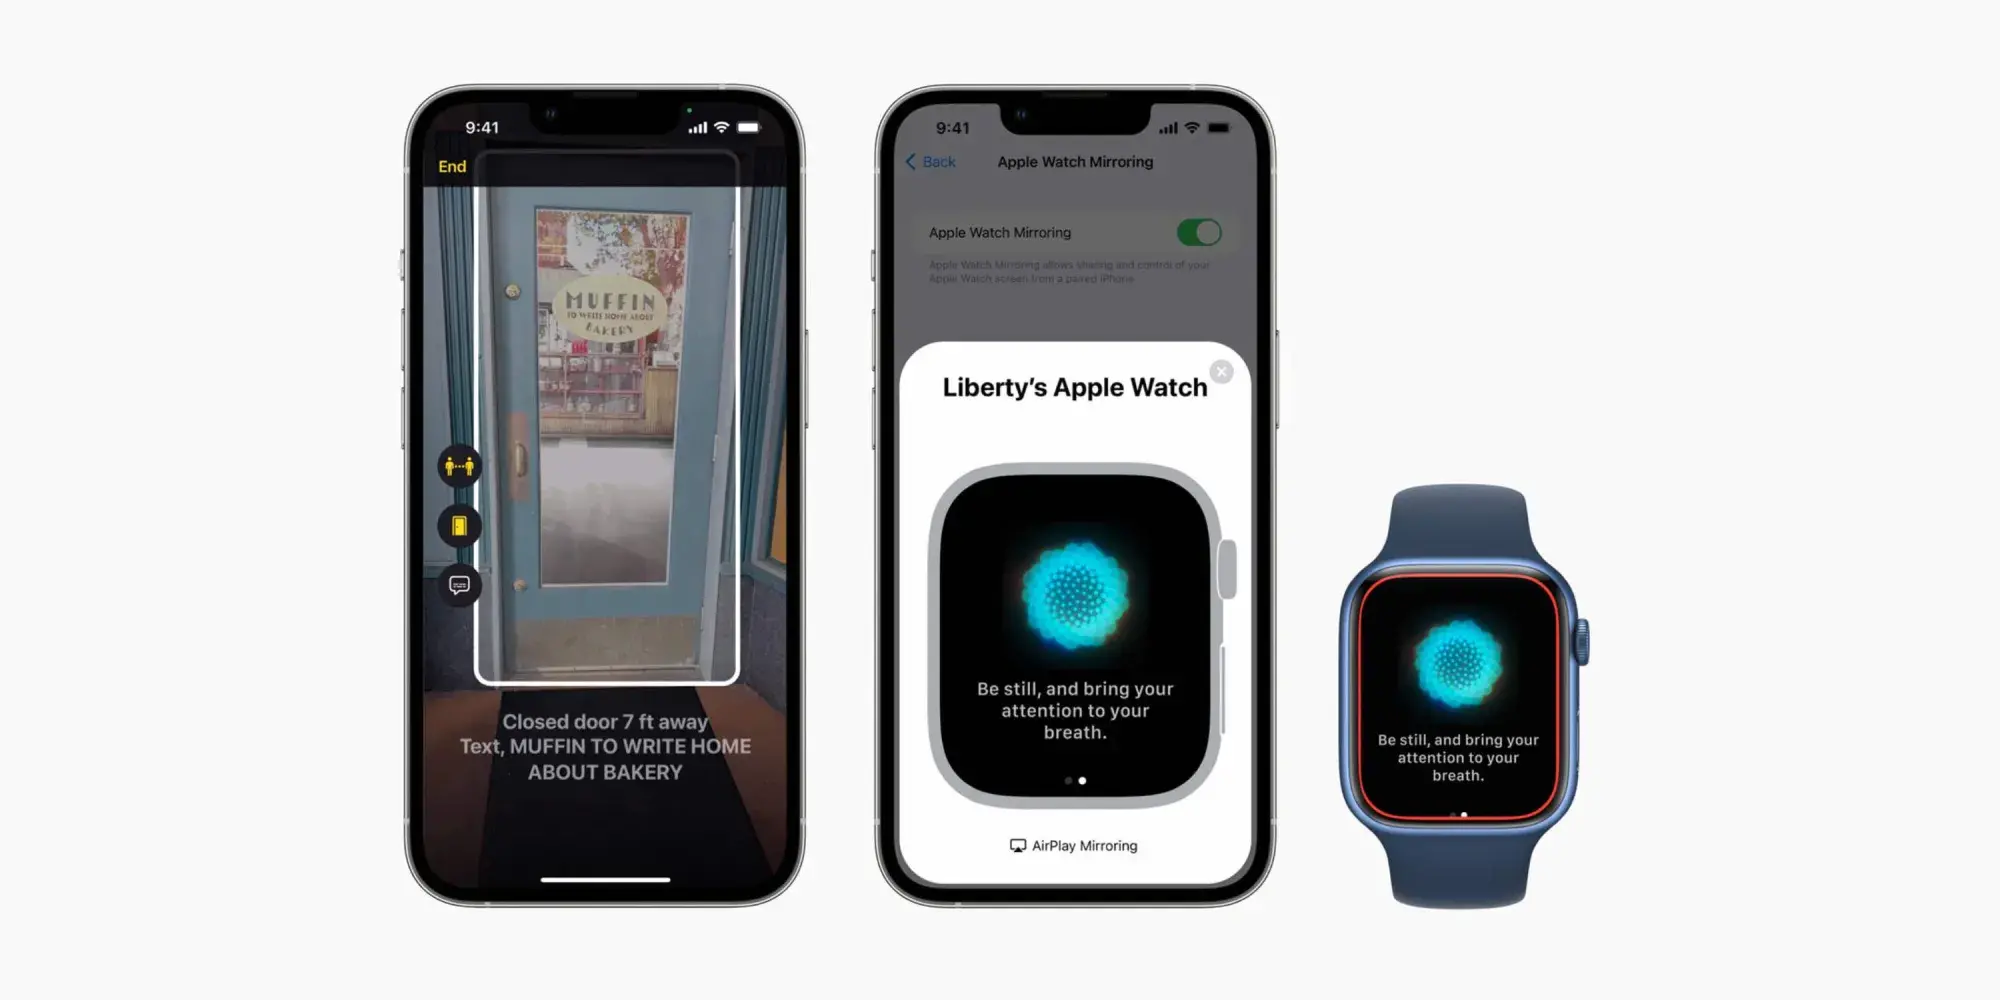 Door detection and Apple Watch Mirroring are showcased here - Apple announces new accessibility features: Door Detection, Apple Watch Mirroring, Live Captions